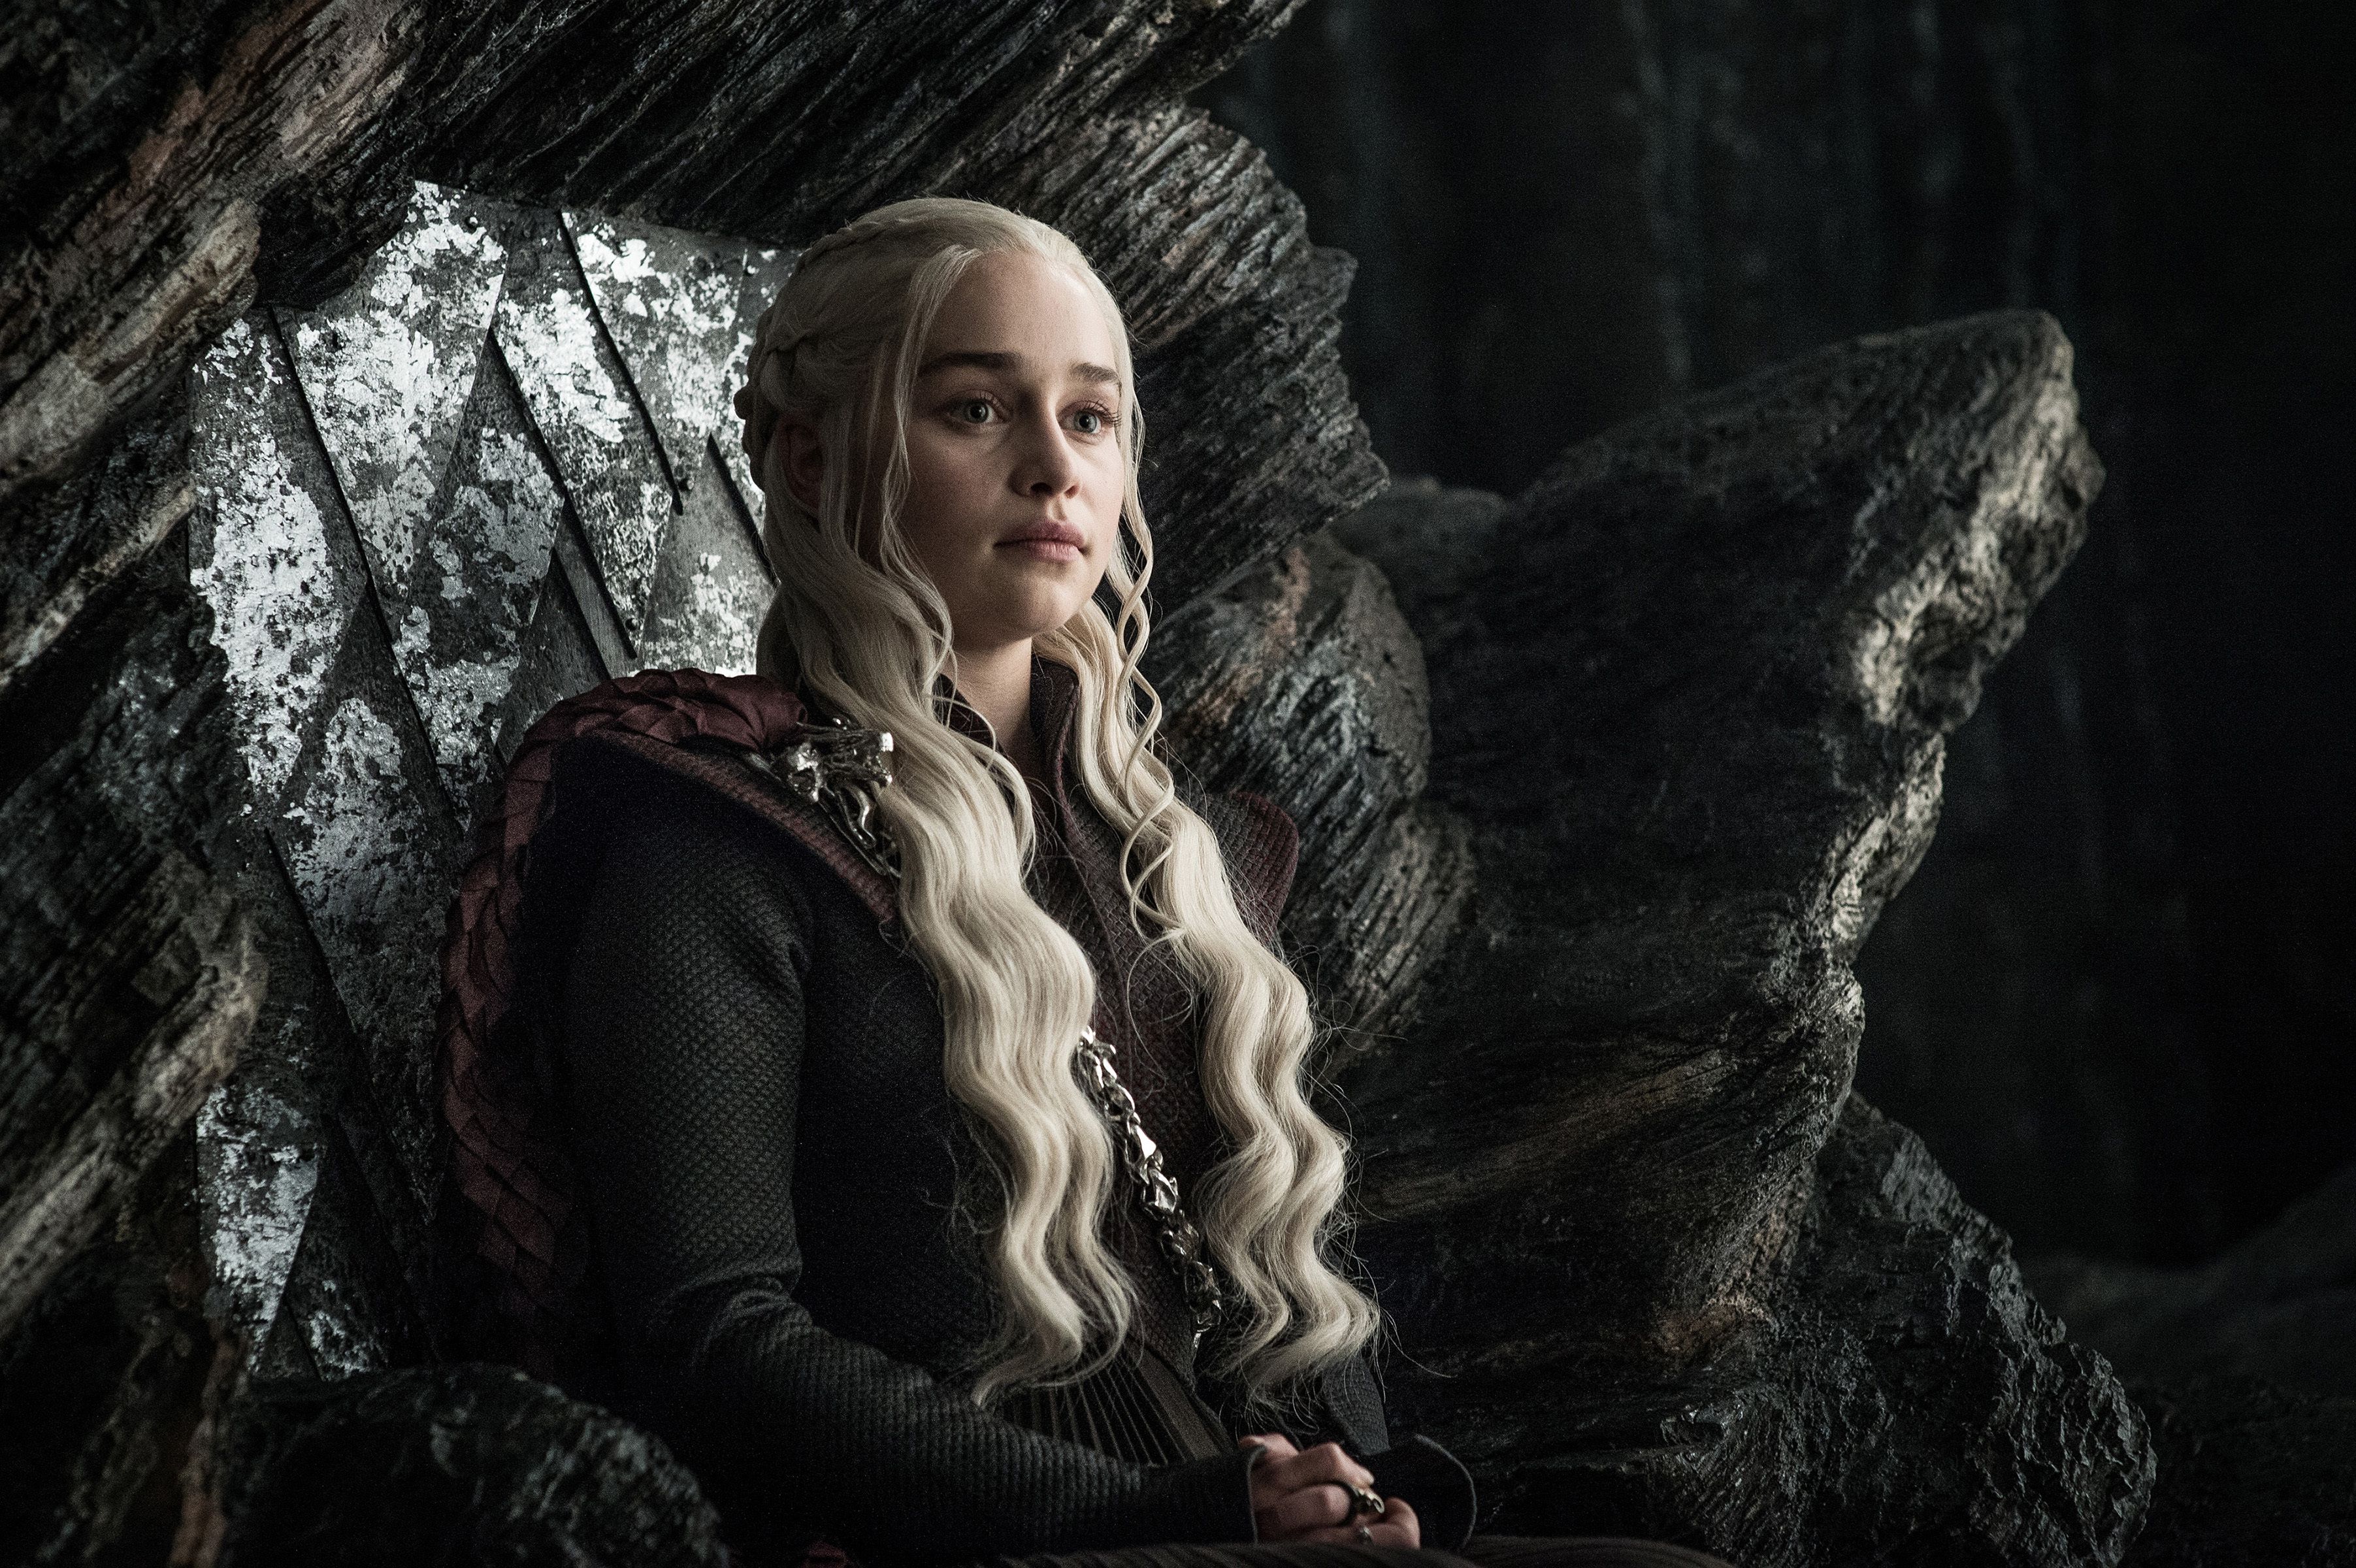 game of thrones5 Recapping Game of Thrones: The Queens Justice Finds Poetry in Westeros